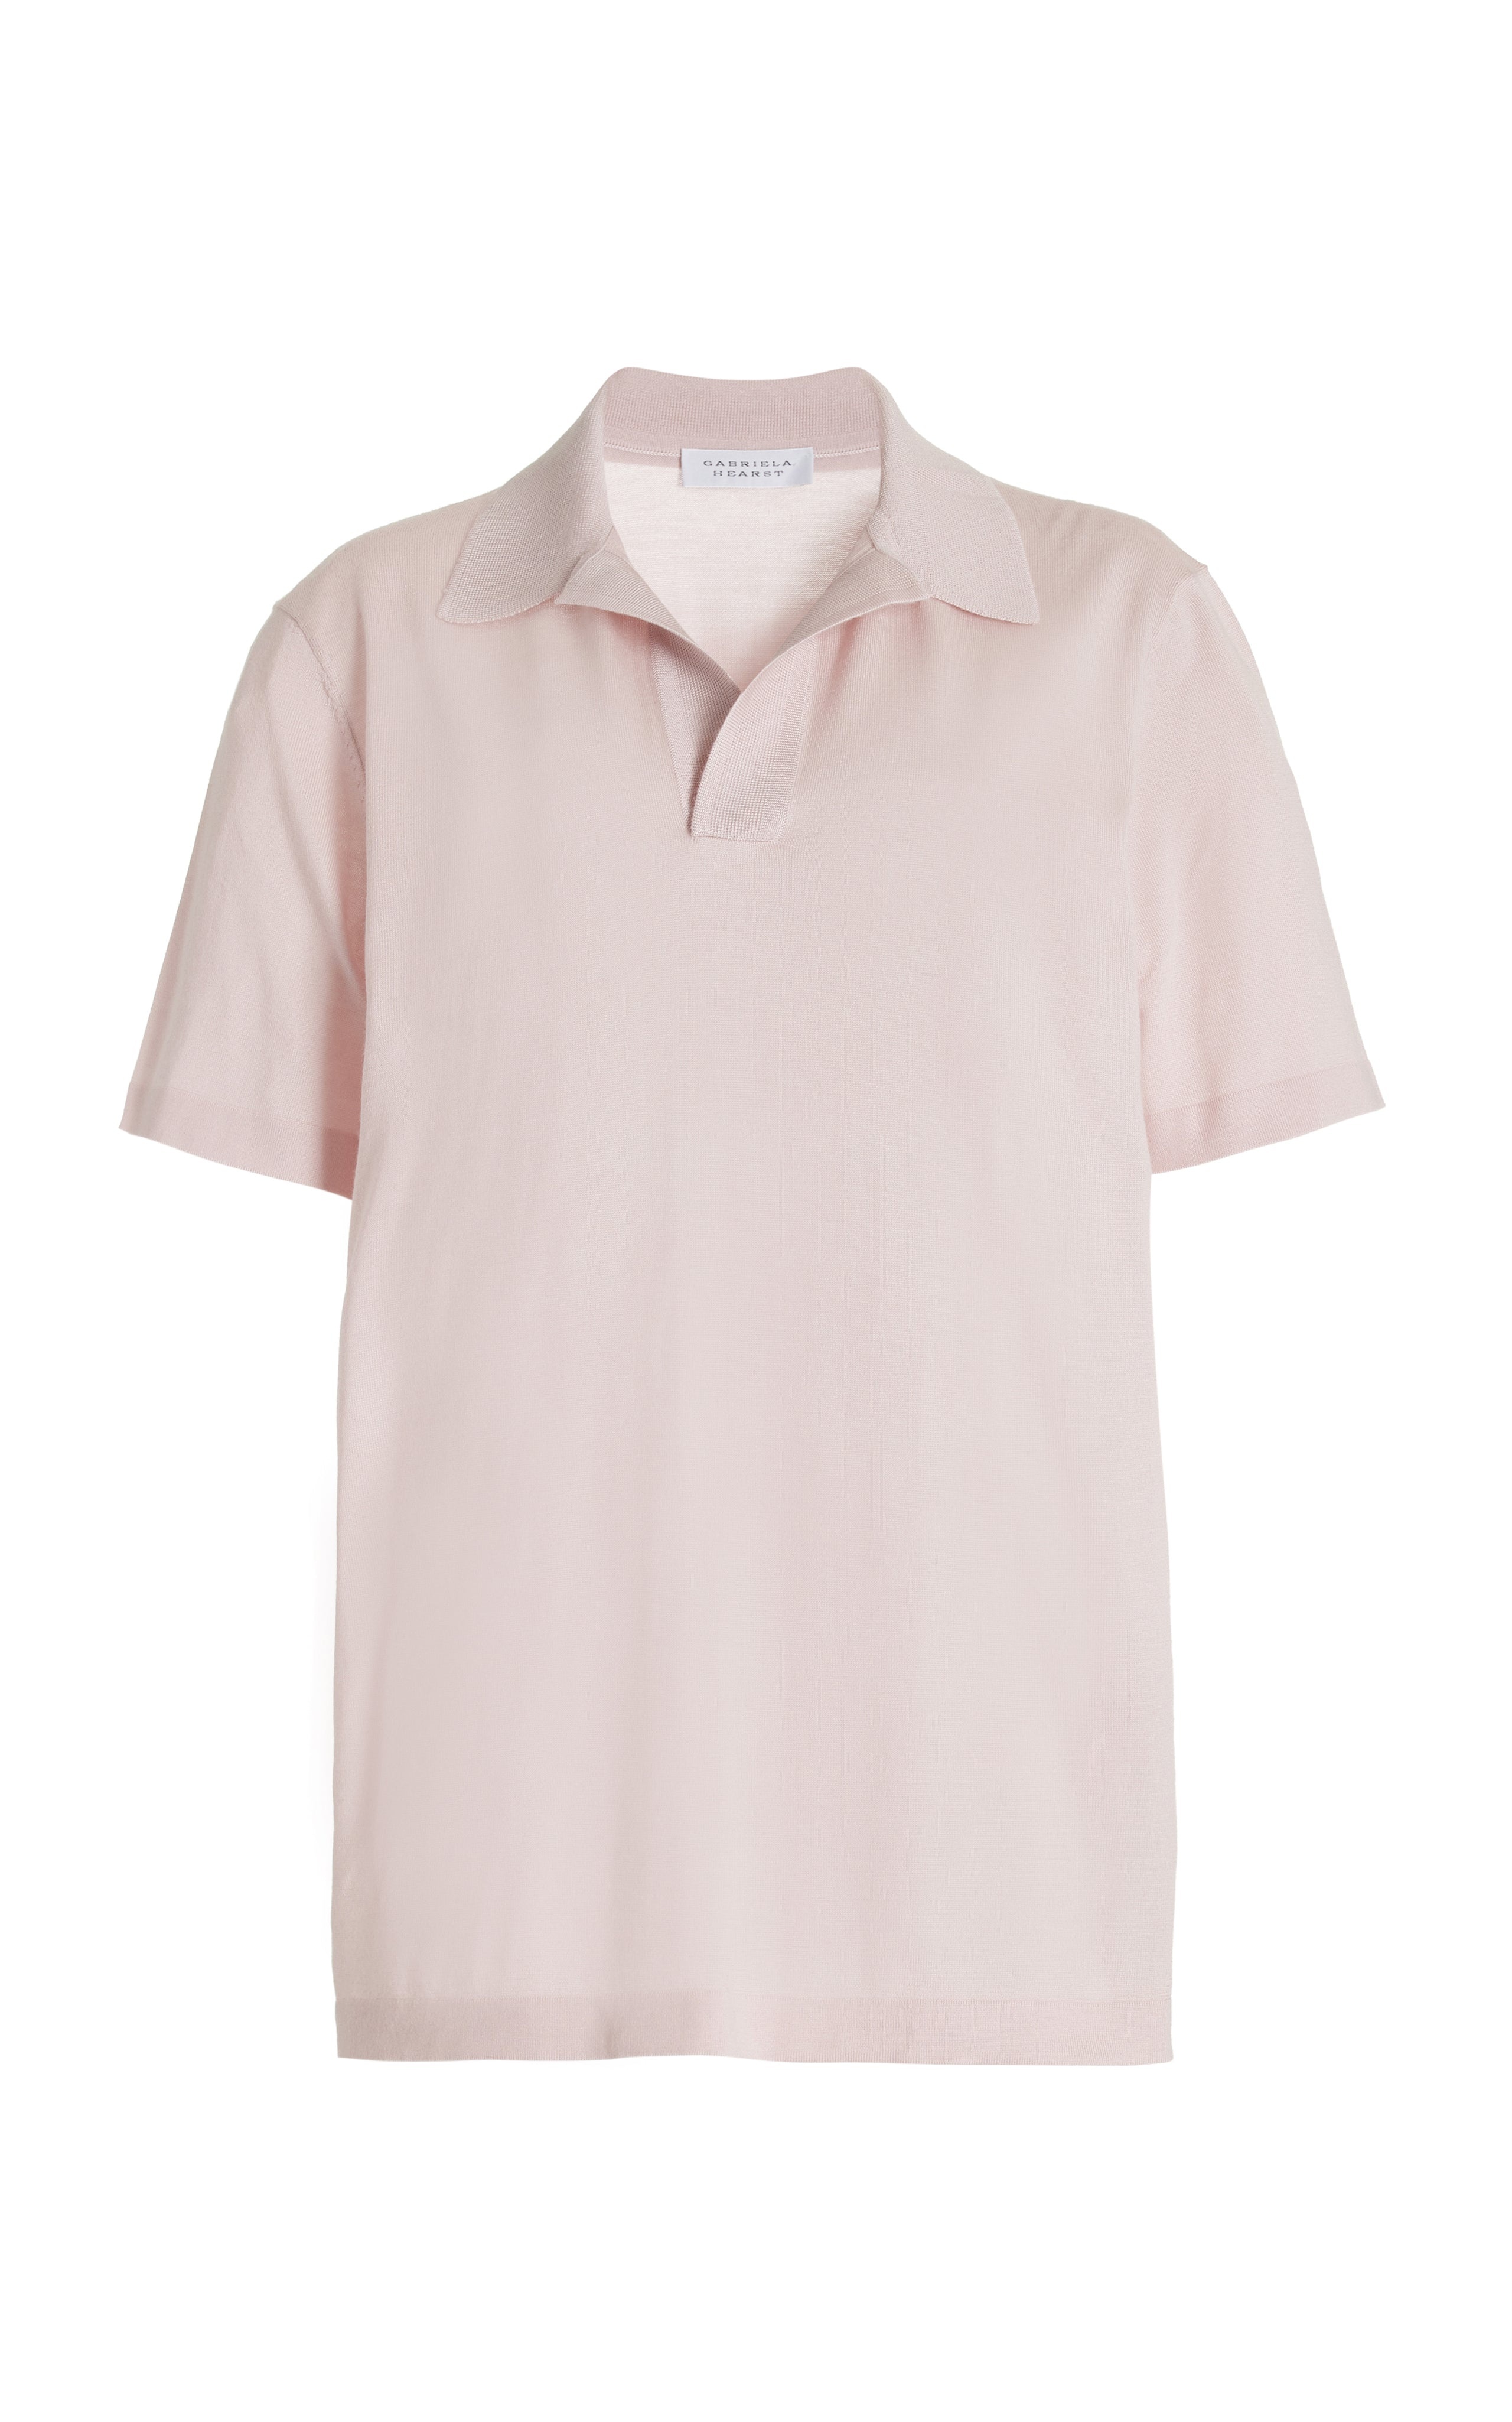 Stendhal Knit Short Sleeve Polo in Blush Cashmere - 1